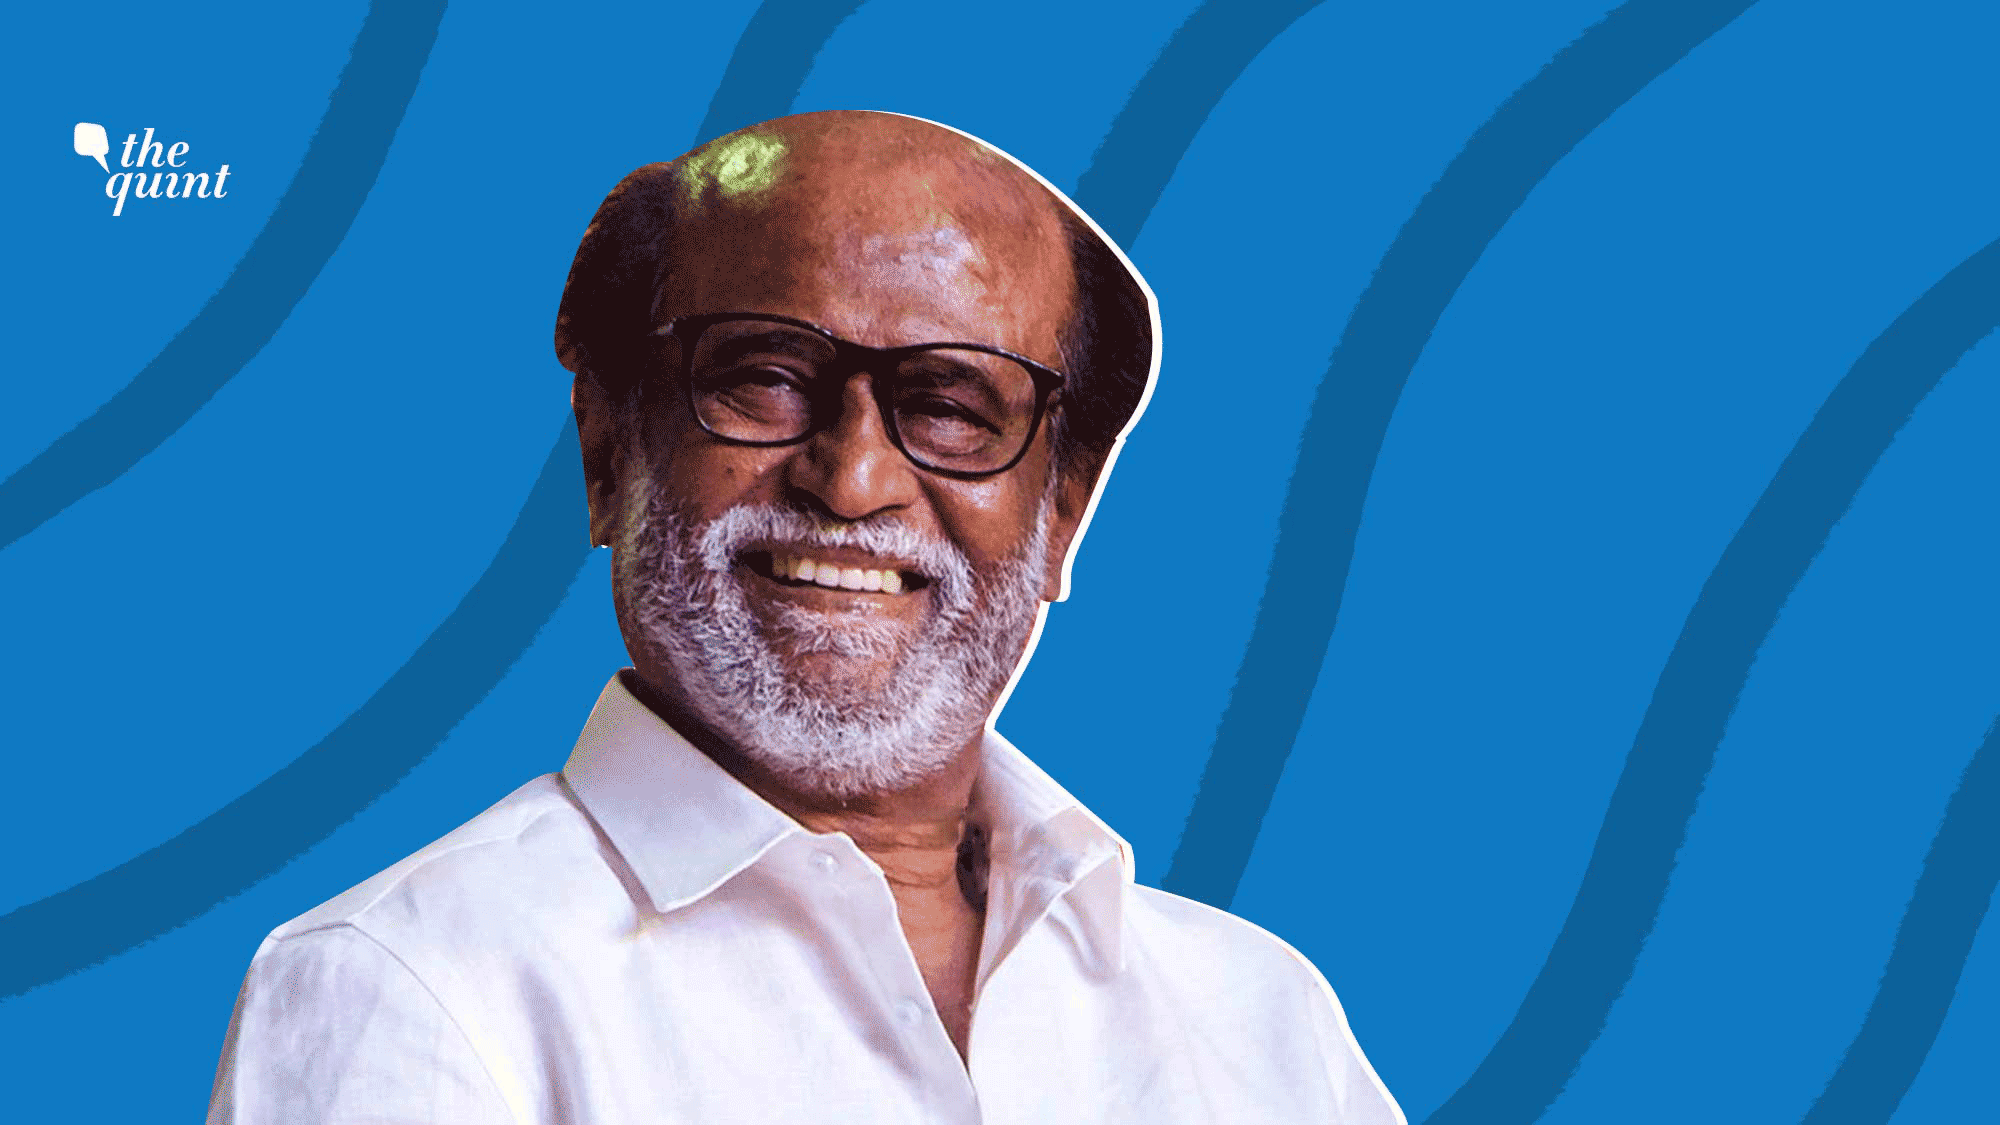 Rajinikanth &amp; Politics: Actor Rajinikanth on 29 December said that he will not launch his political party as scheduled on account of his poor health.